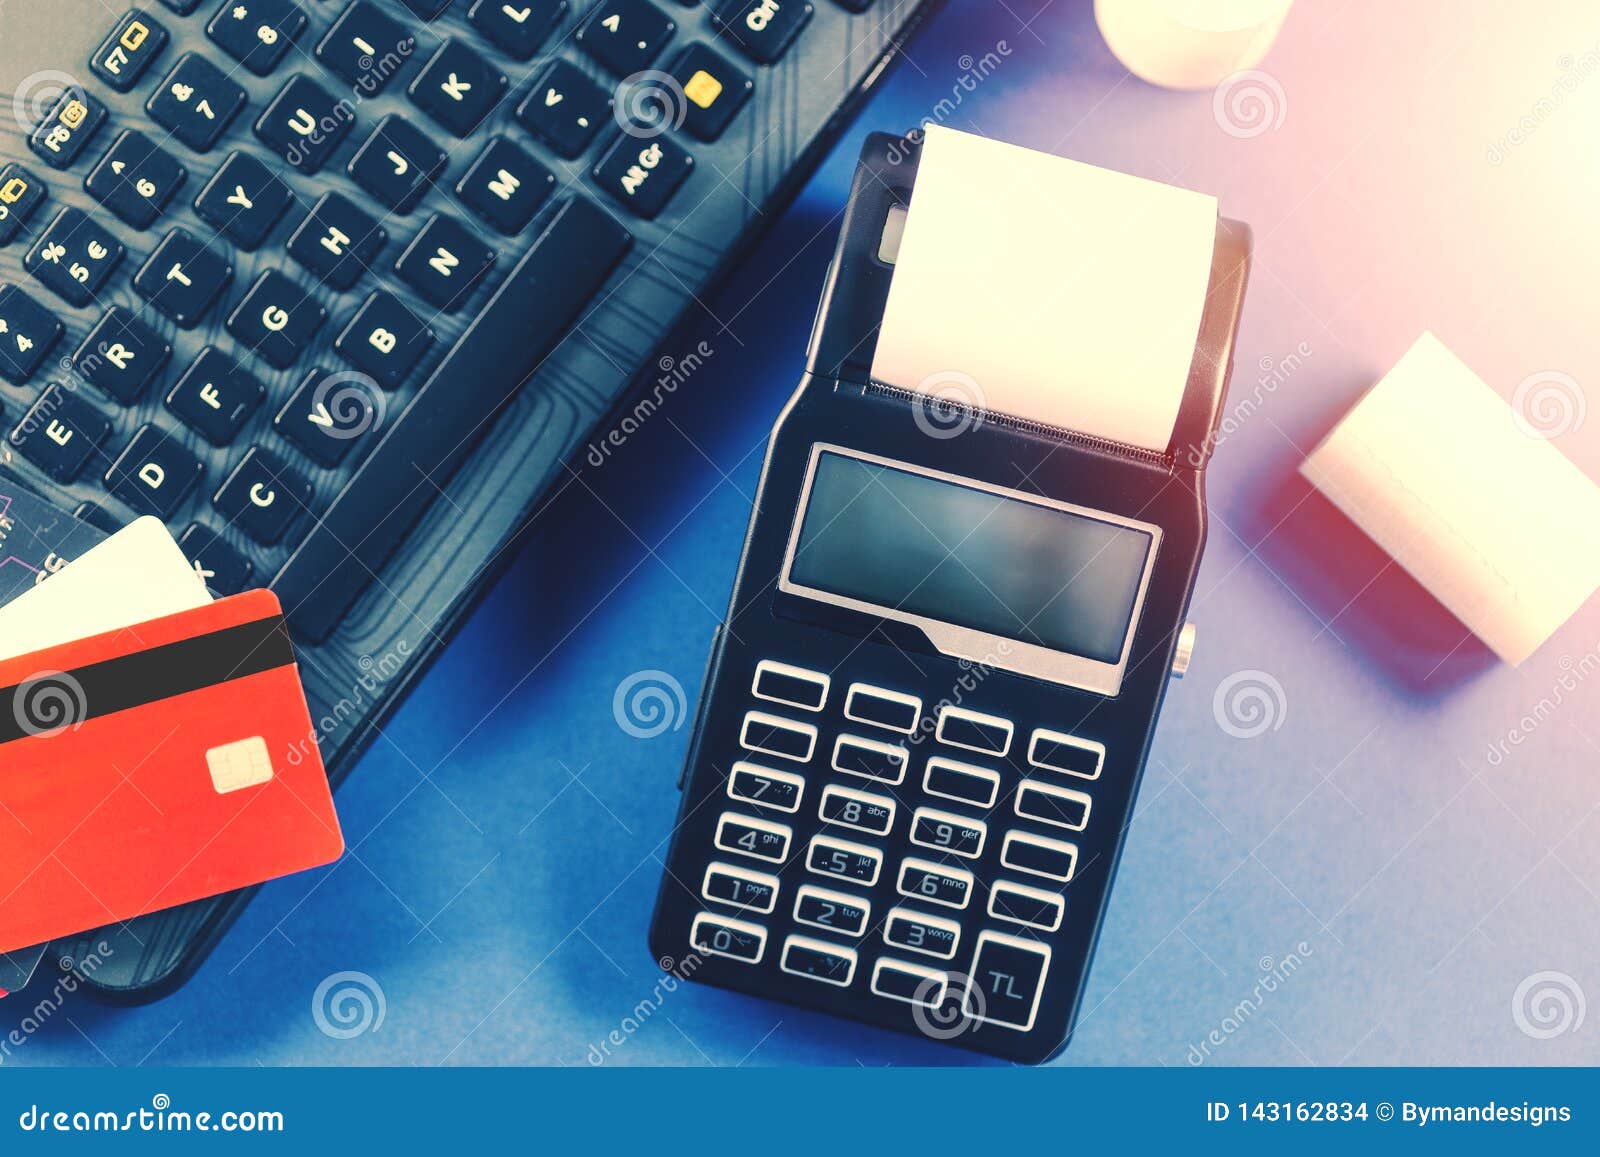 portable-cash-register-and-credit-card-on-keyboard-stock-photo-image